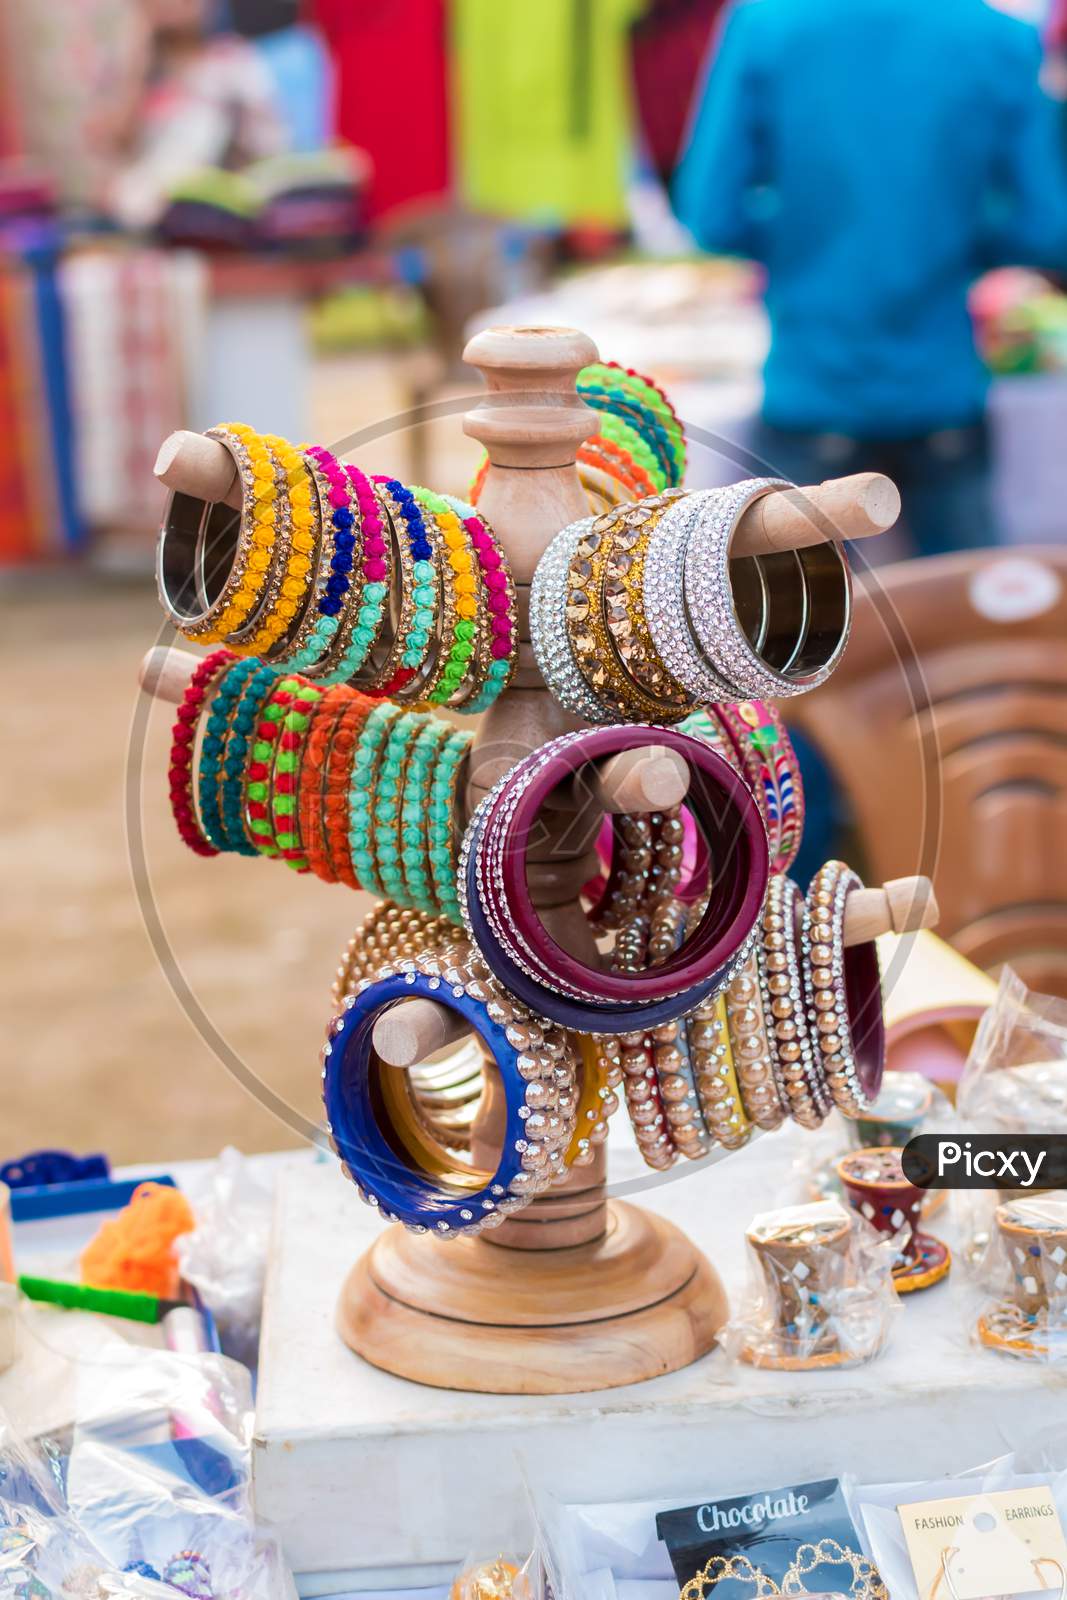 Indian Traditional Handmade Bangles With Blurred Background Is Displayed In A Street Shop For Sale. Indian Handicraft And Art